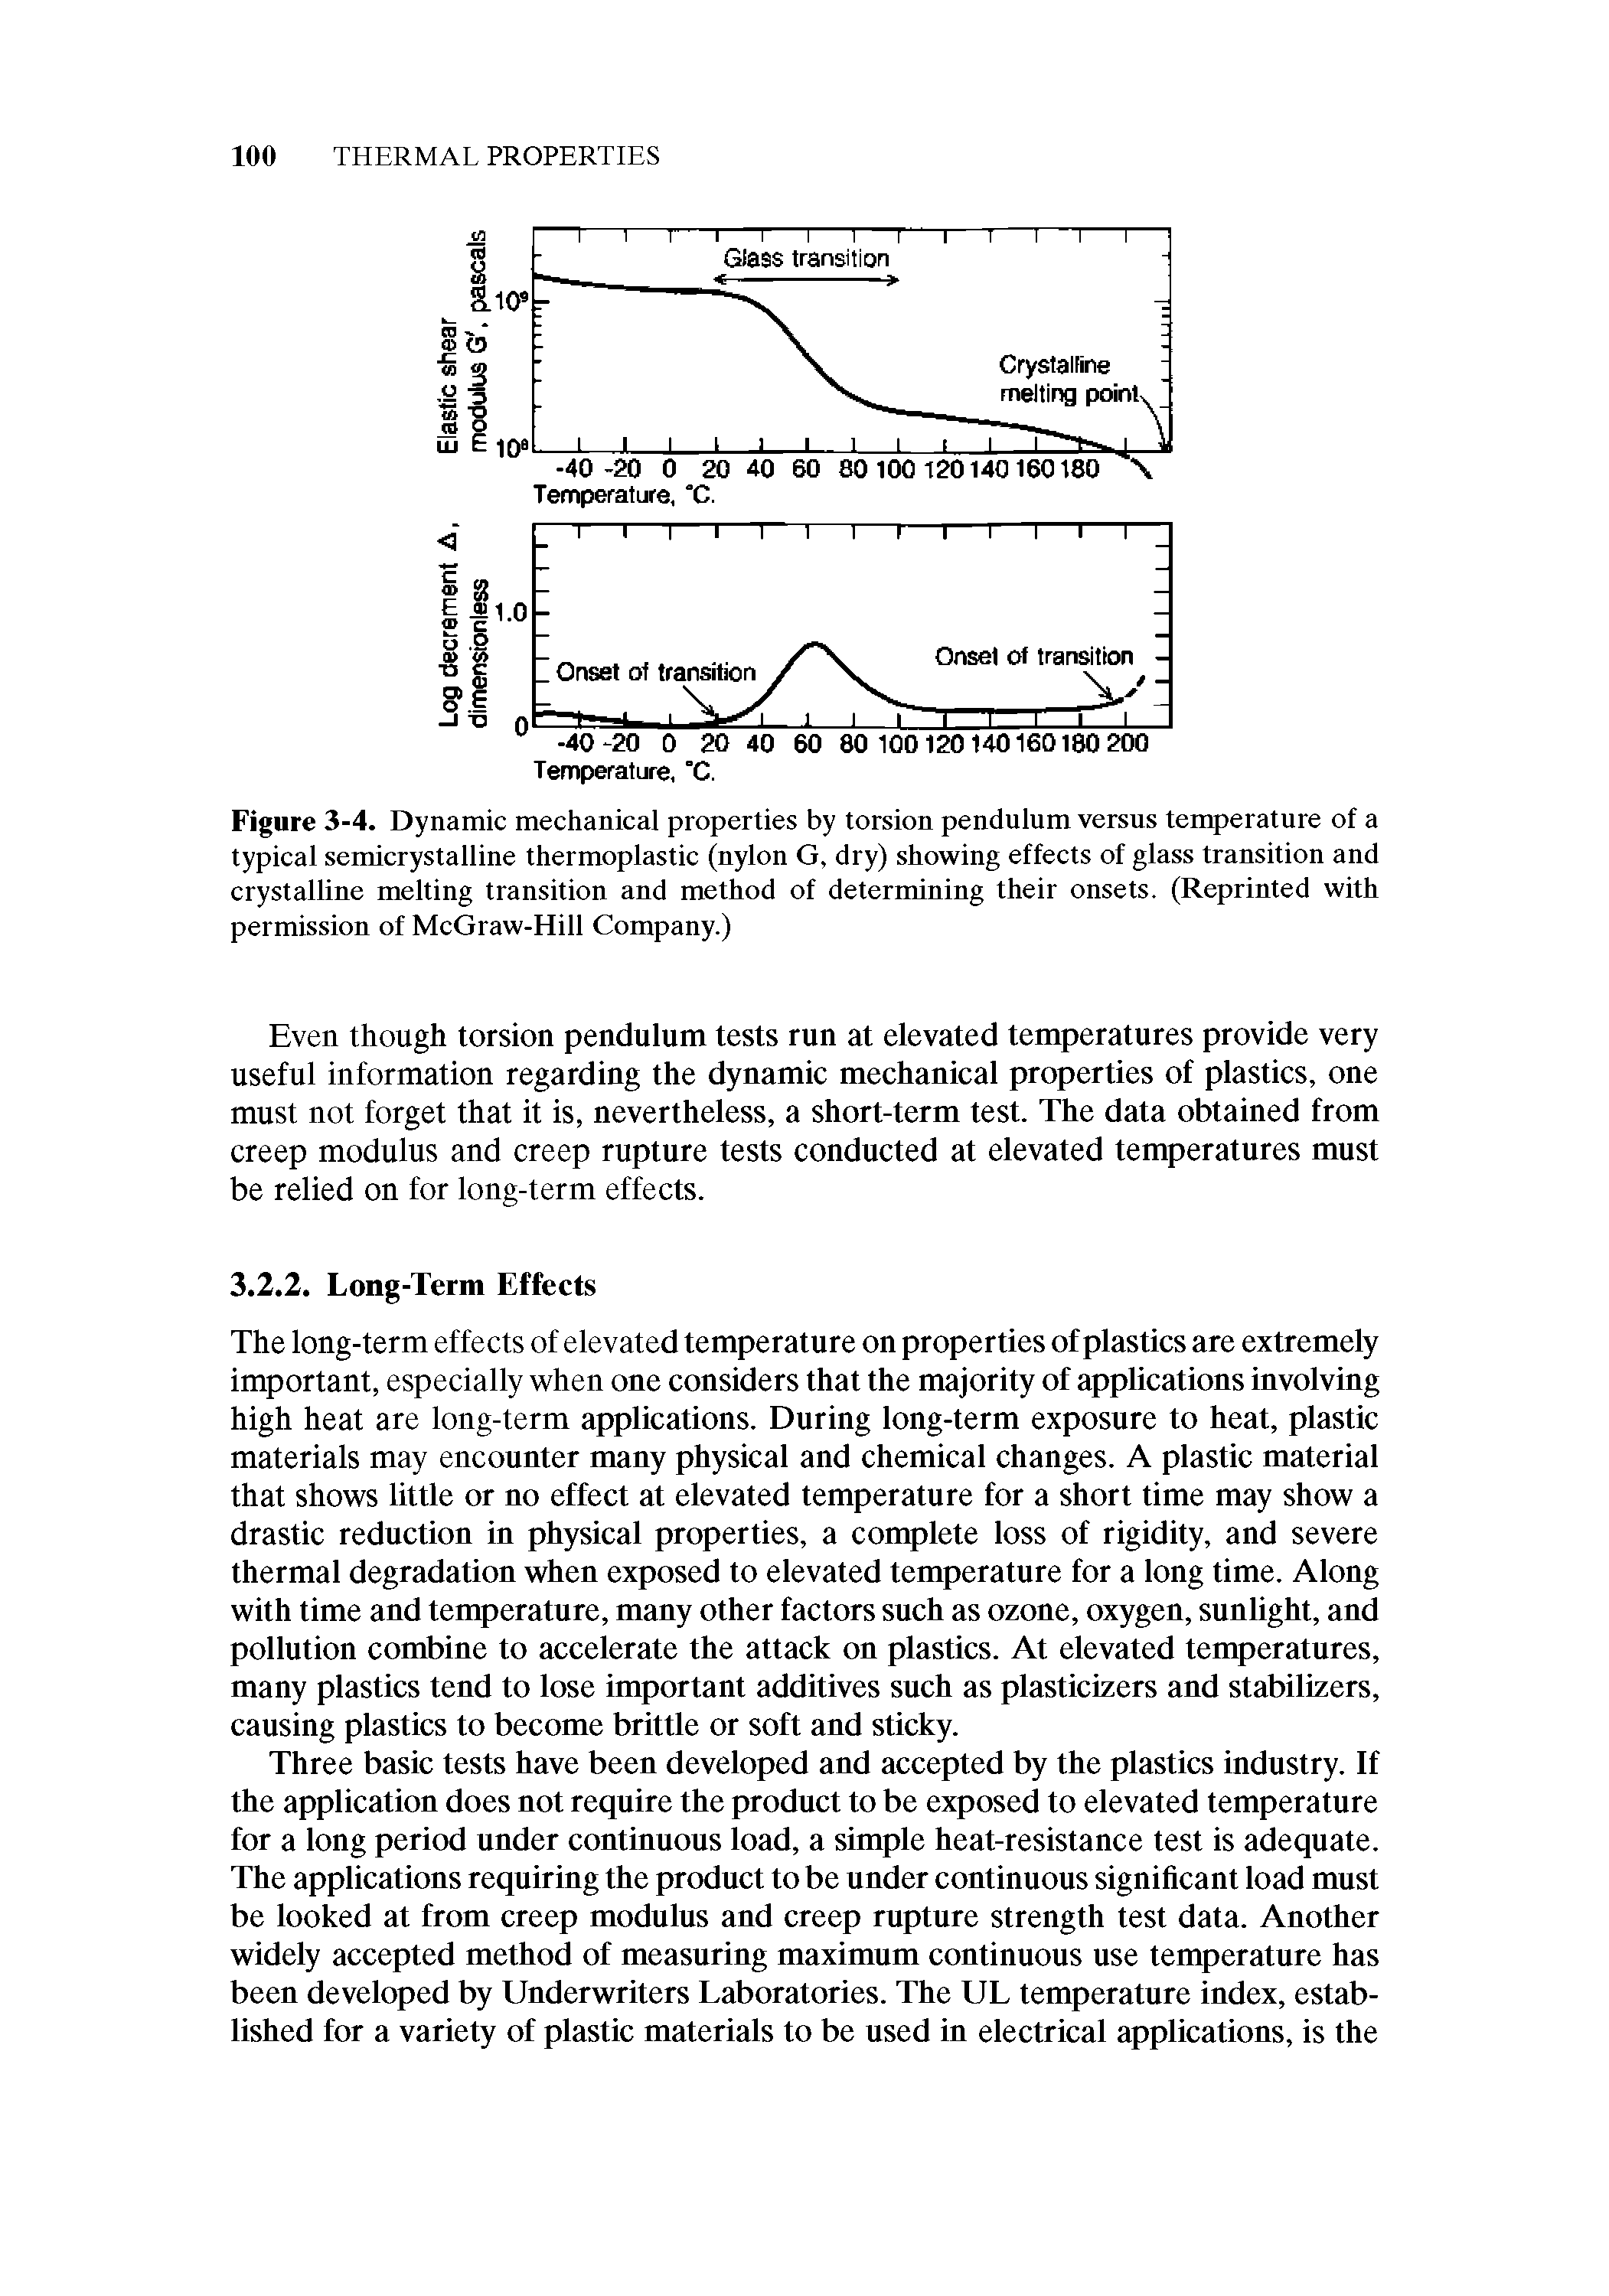 Figure 3-4. Dynamic mechanical properties by torsion pendulum versus temperature of a typical semicrystalline thermoplastic (nylon G, dry) showing effects of glass transition and crystalline melting transition and method of determining their onsets. (Reprinted with permission of McGraw-Hill Company.)...